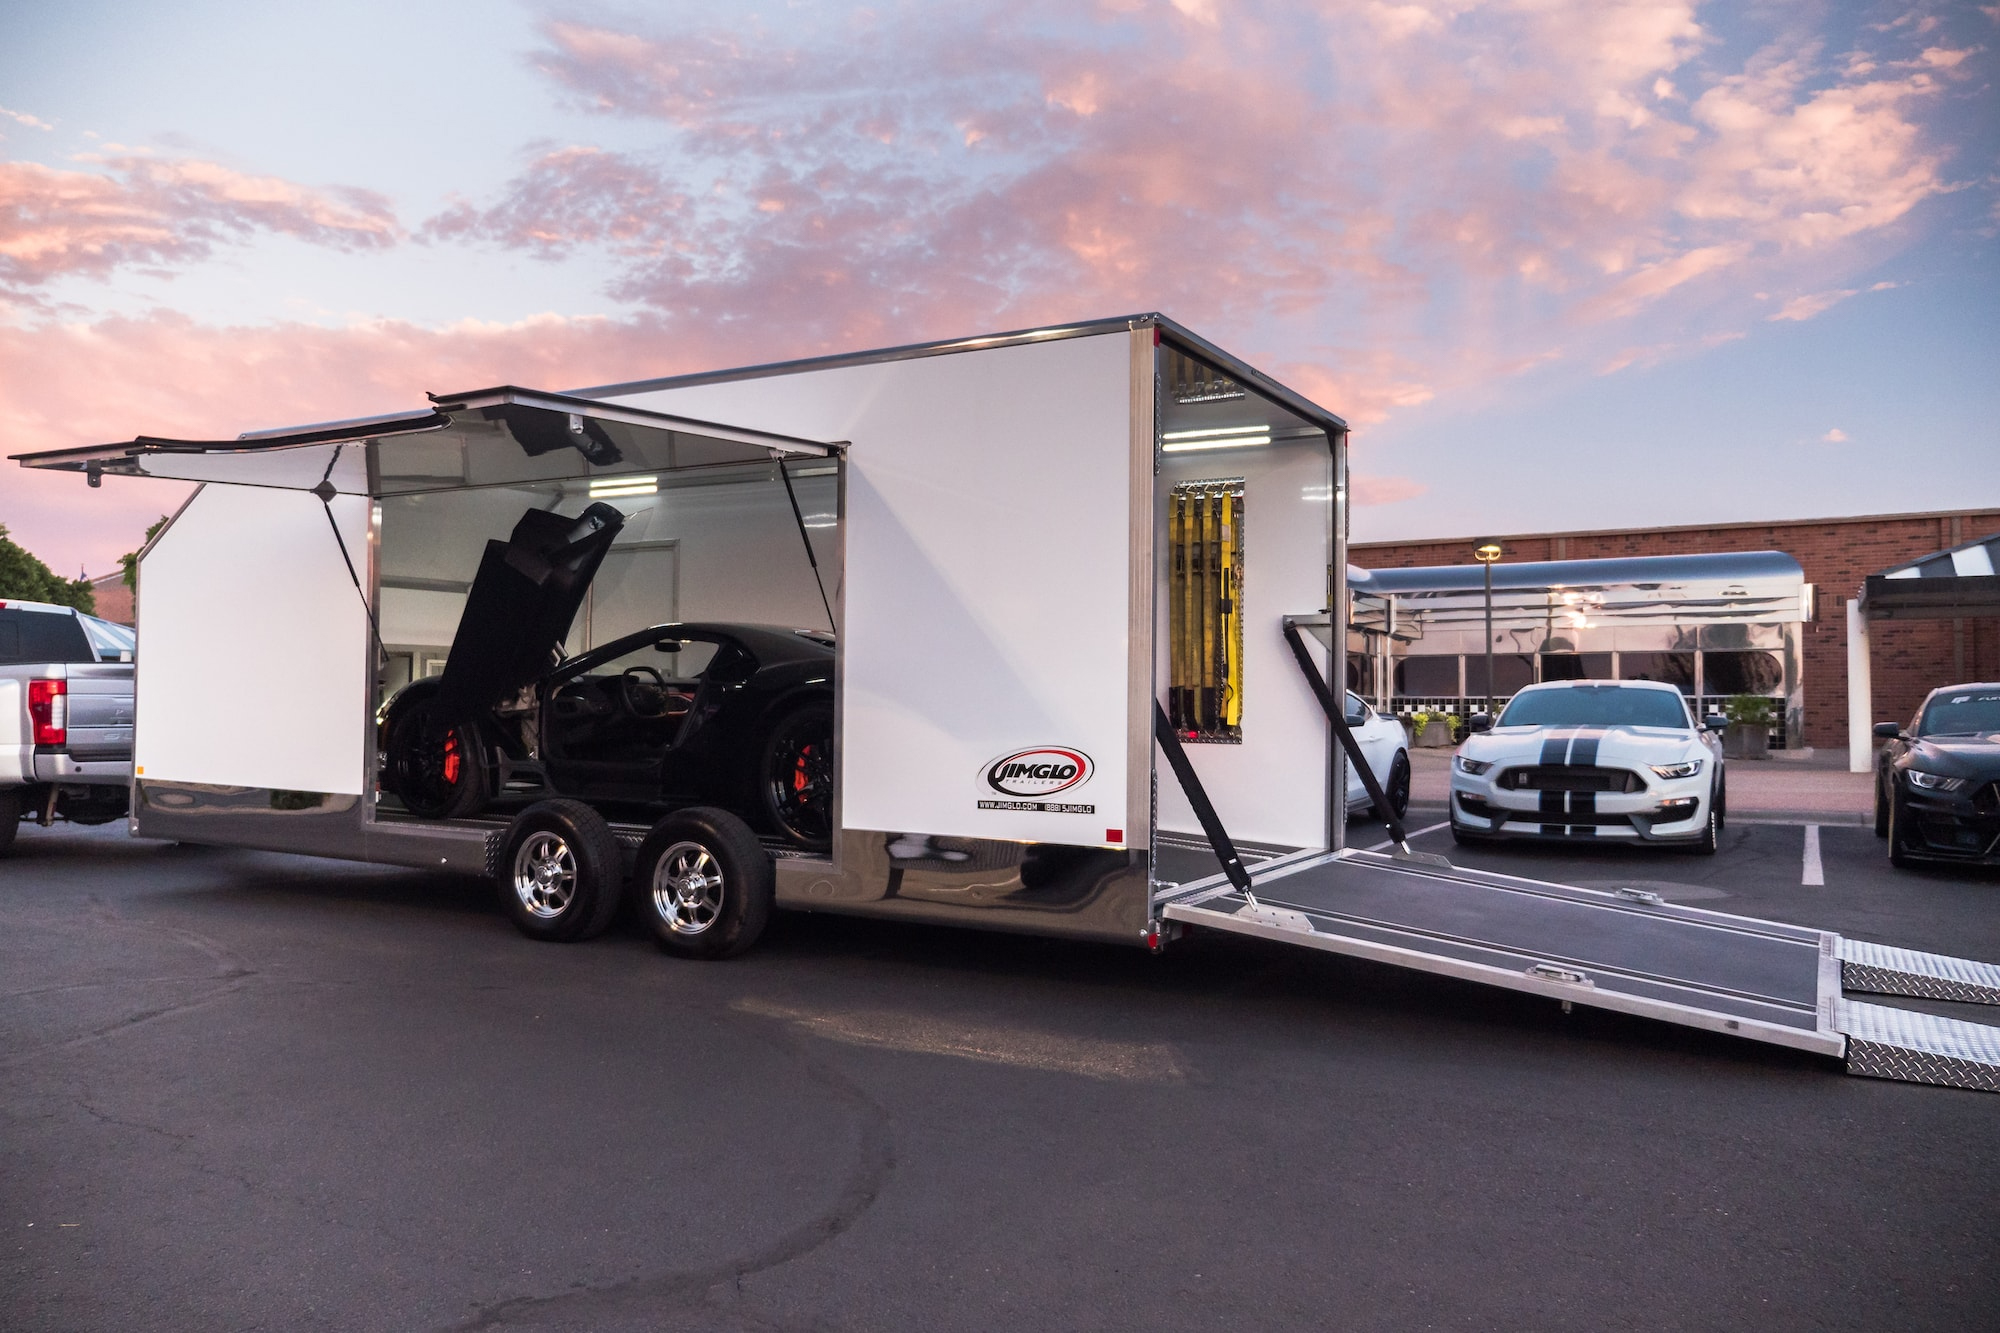 enclosed trailers used to transport luxury cars